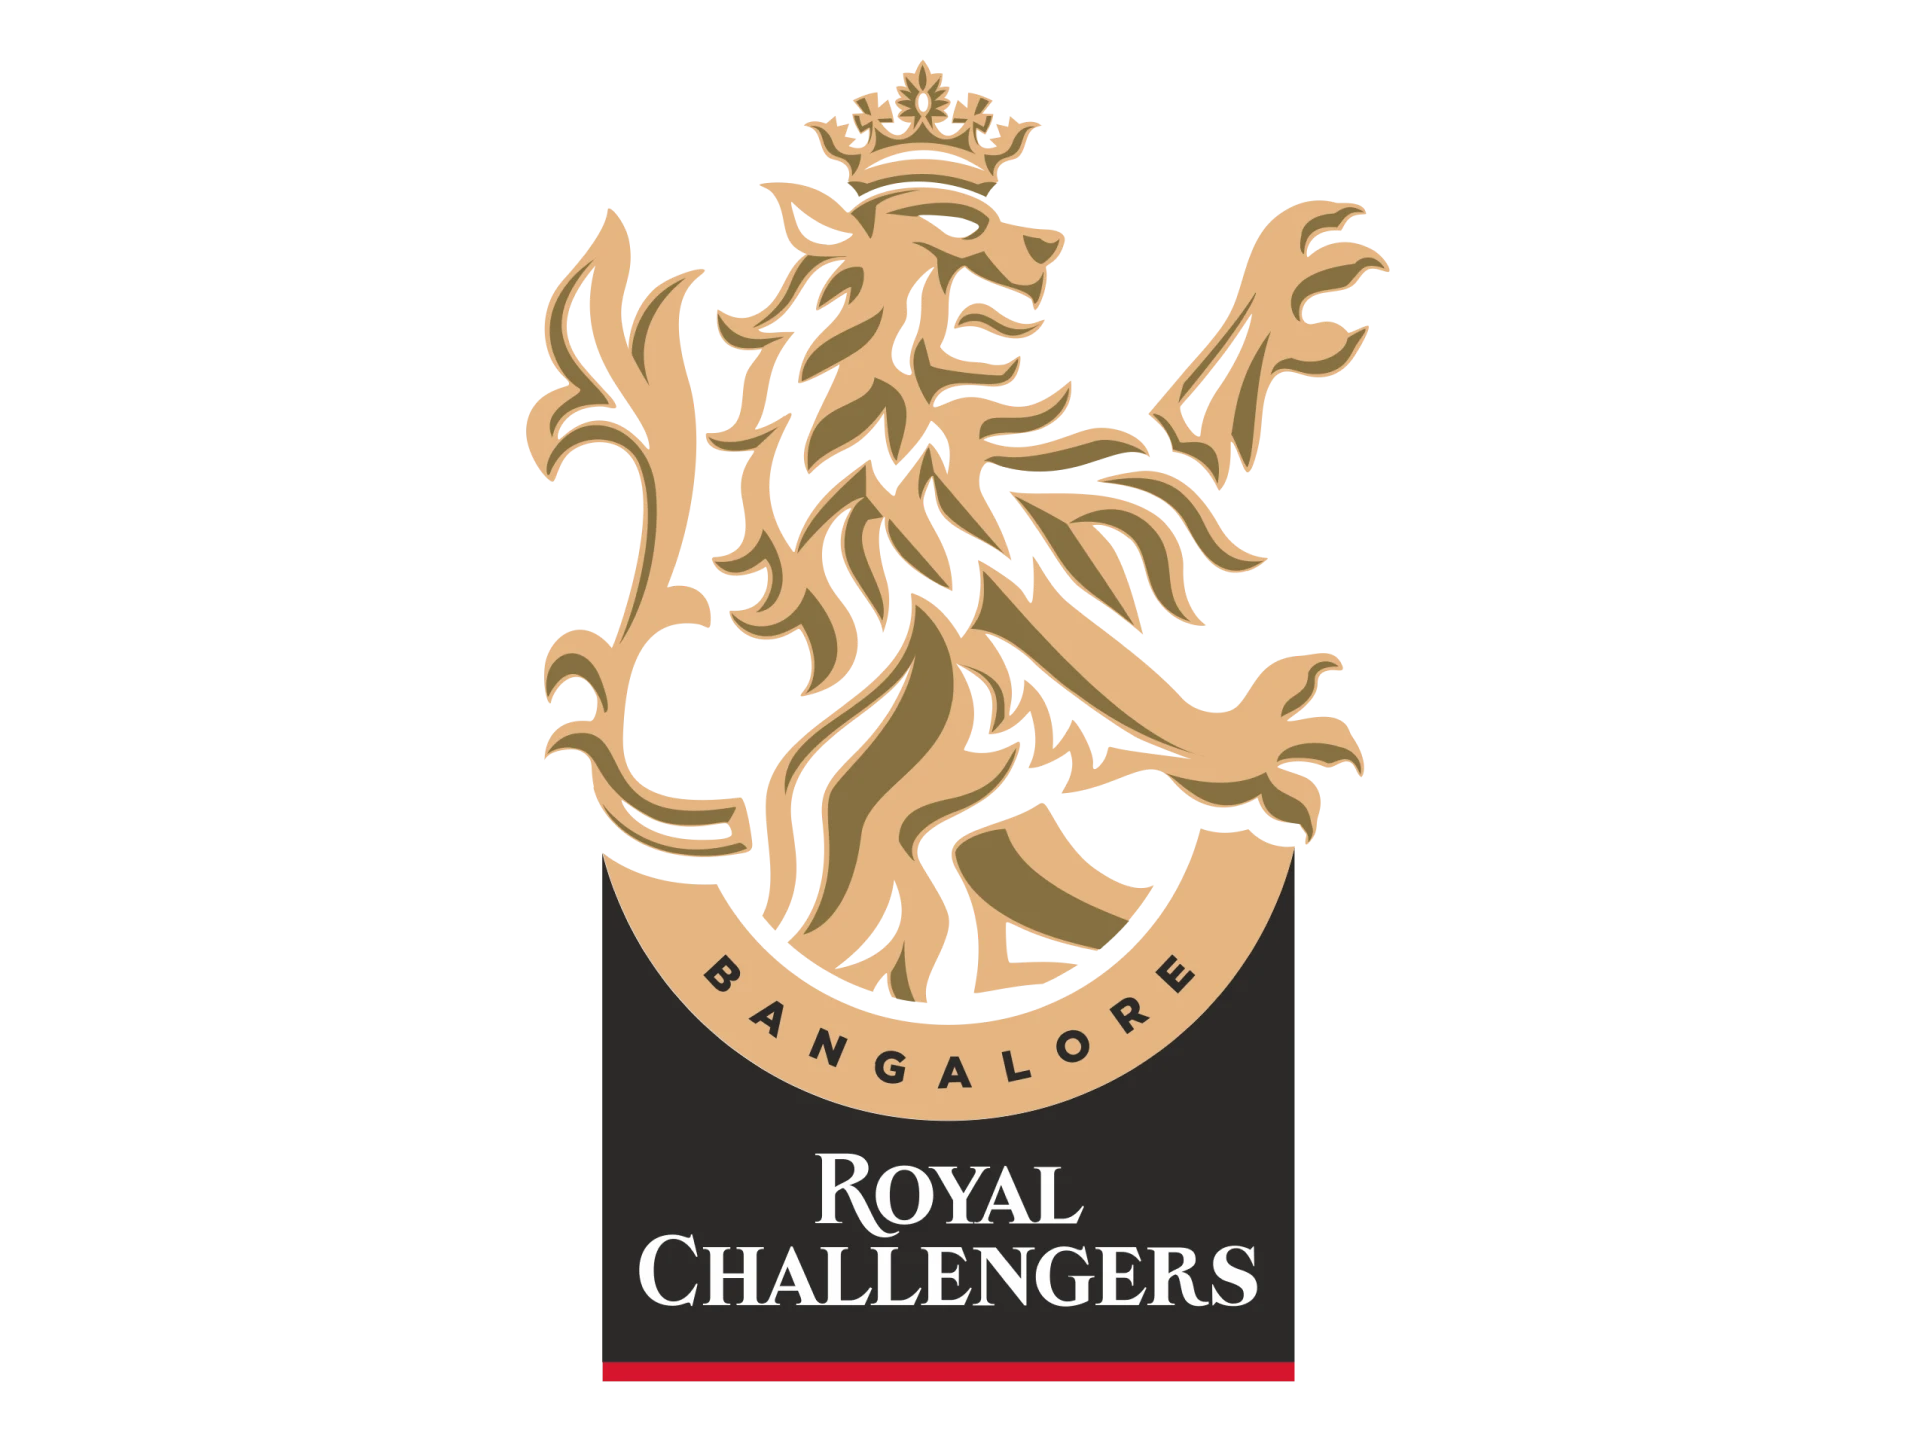 Royal Challengers Bangalore is an up and coming team in the IPL, try betting on them.